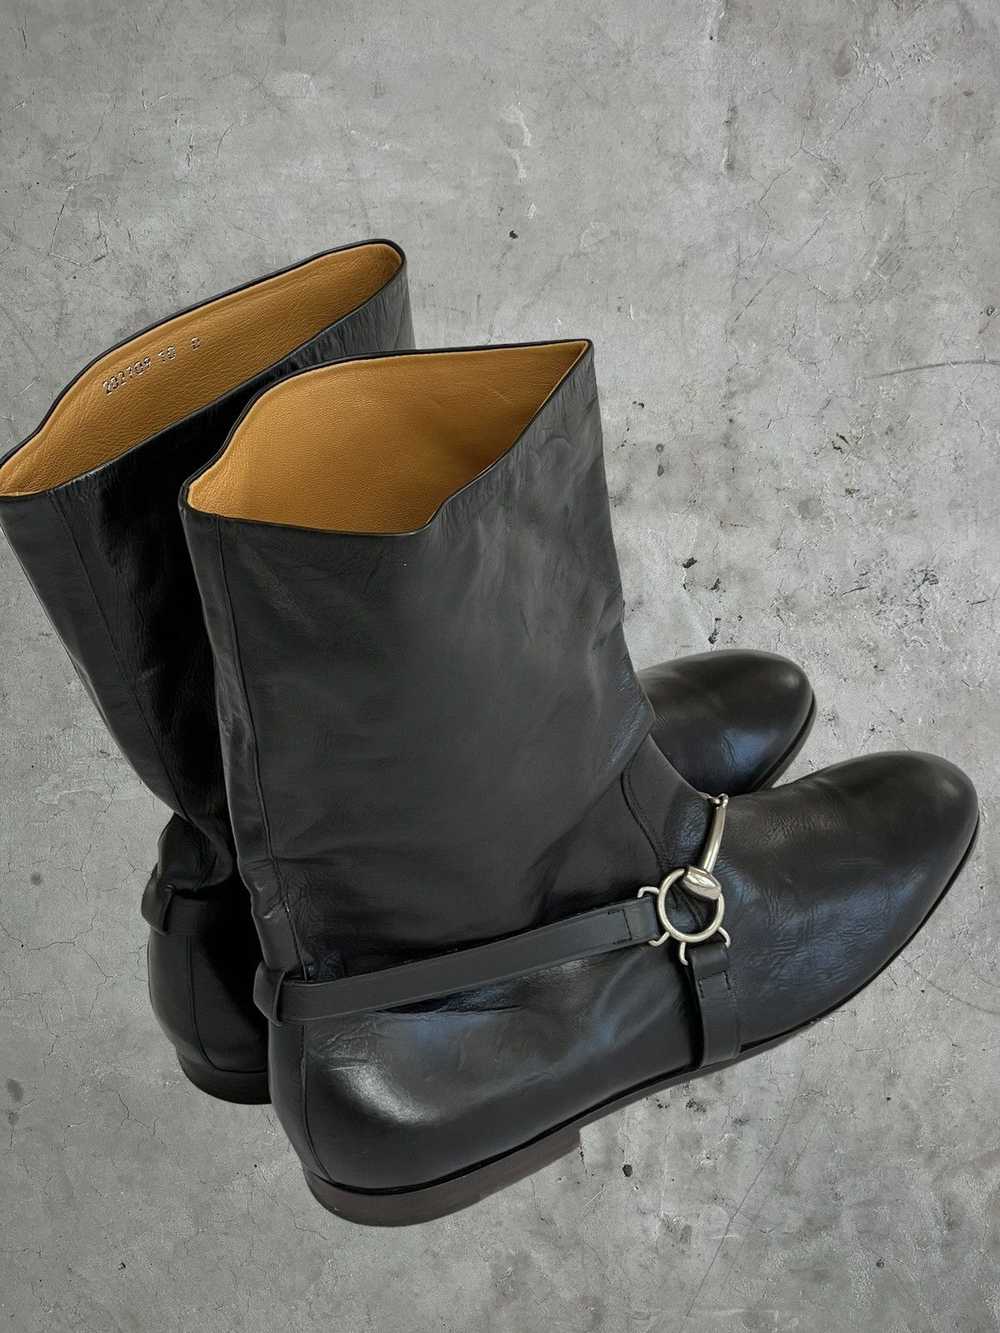 Gucci Gucci Leather Buckle Boots - image 10